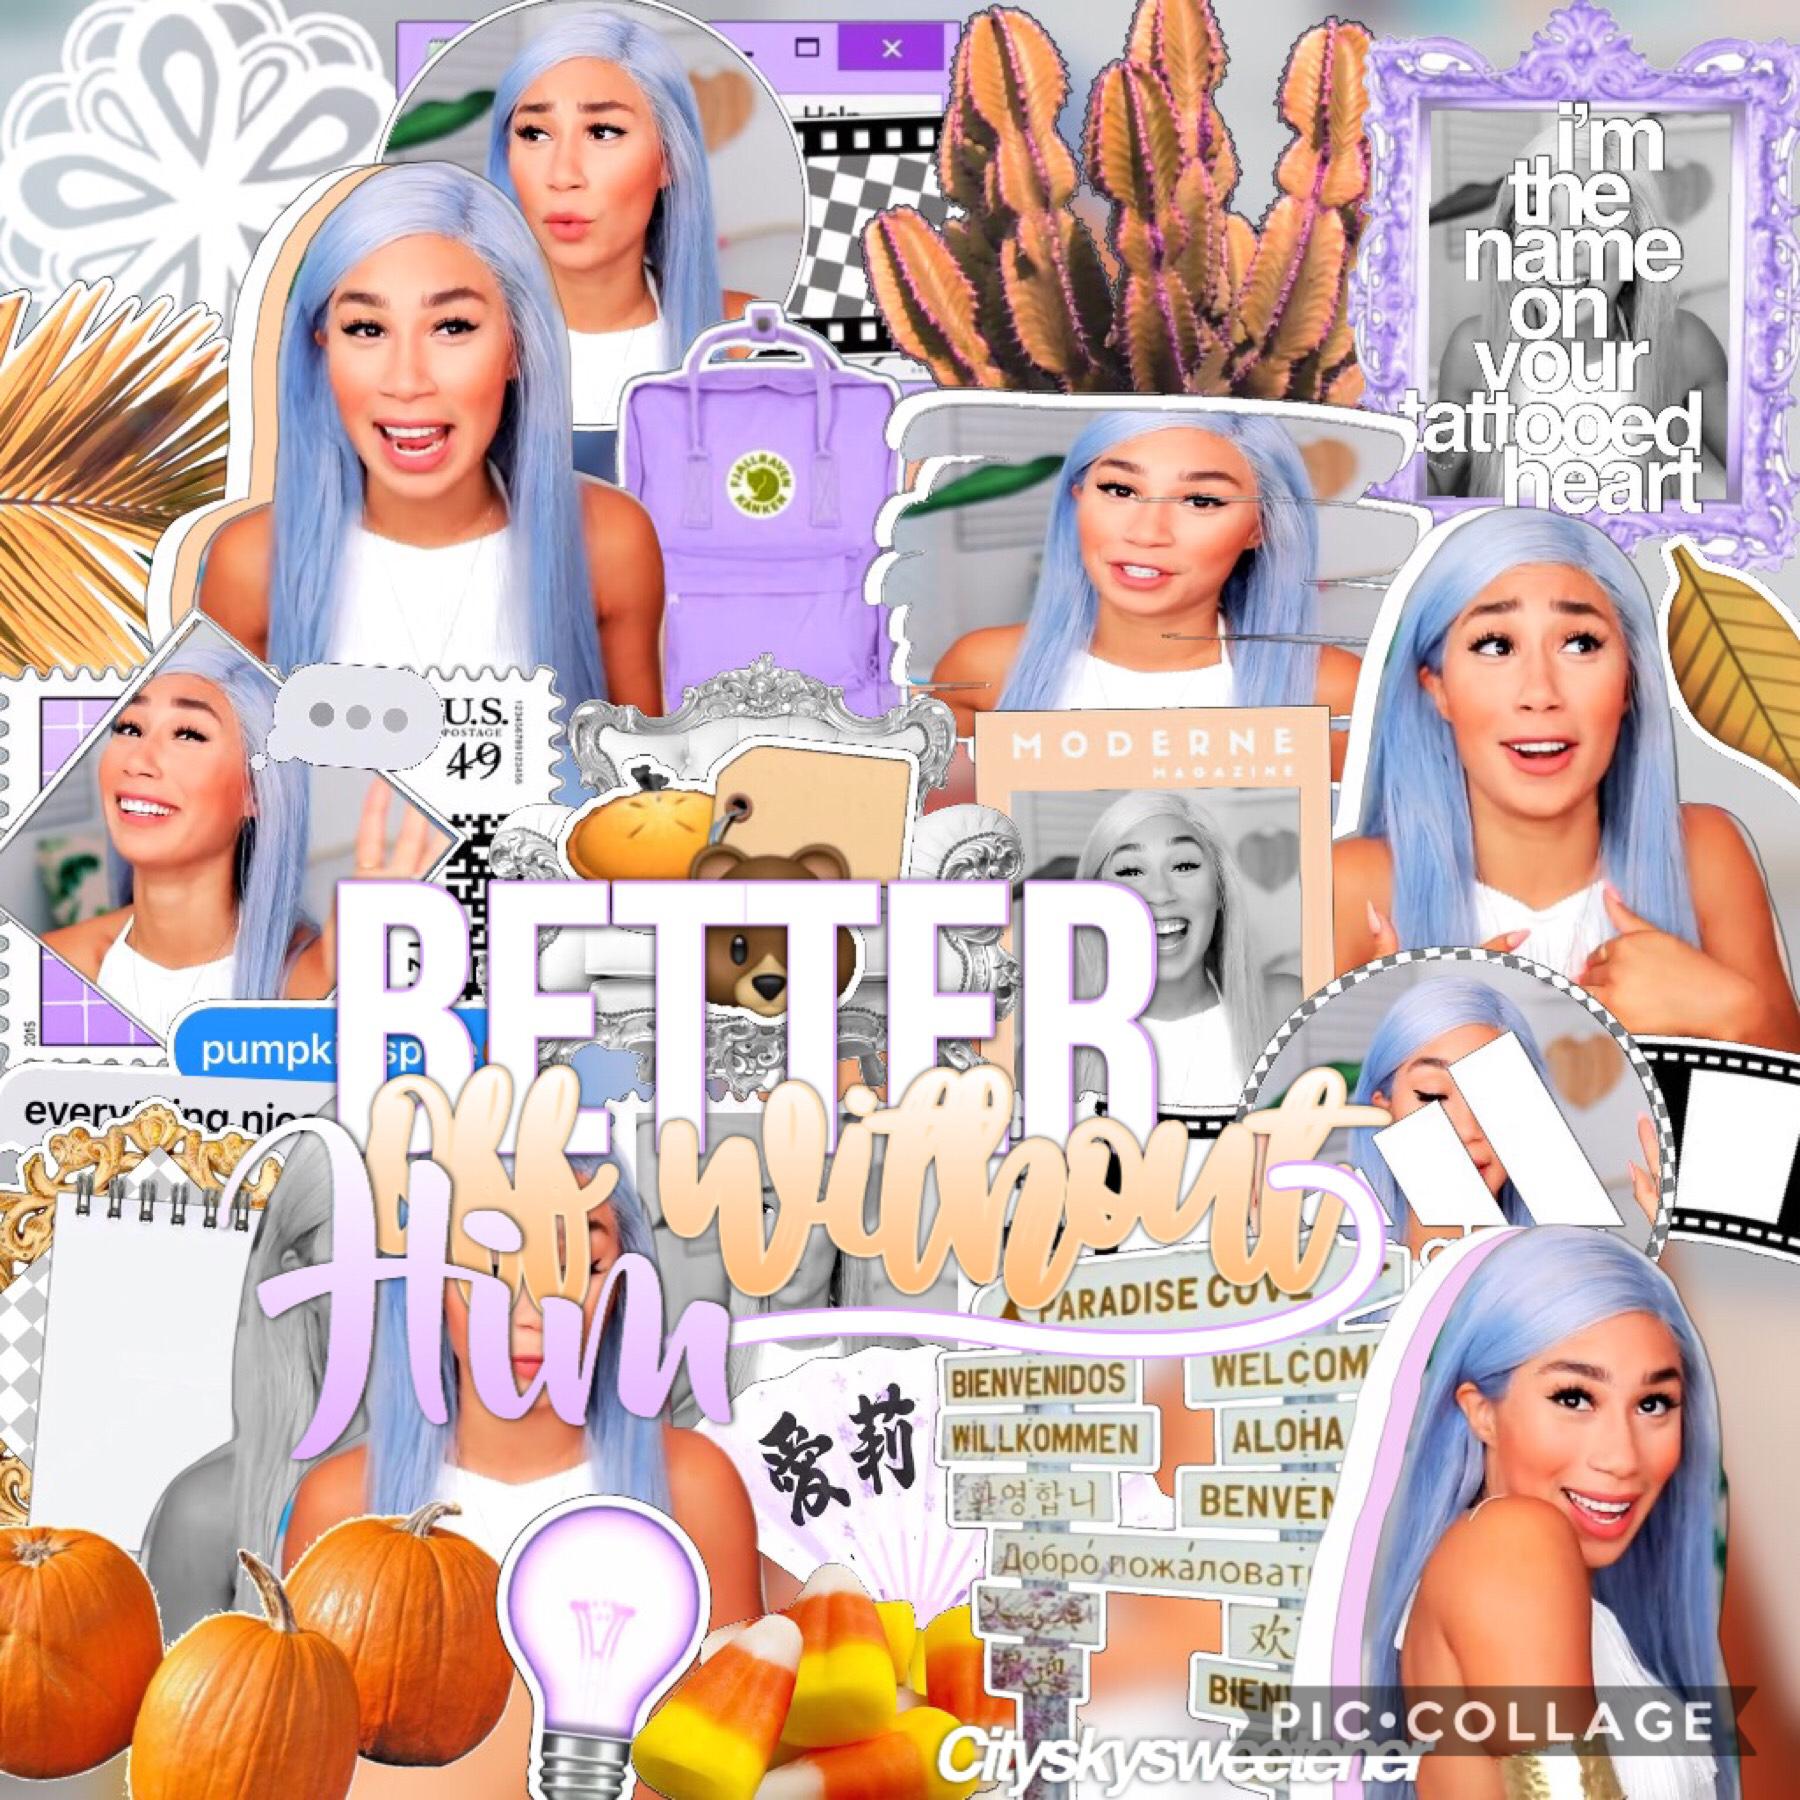 💜 TAP 💜
Hello!! I’m lovin this new edit 😍😍😍I’m v v happy this week is finally over!!😂🍁💫 I had a rough week and now I finally get to relax ☺️☺️ today I’m gonna get pumpkins with my friends hbu!?🍁🍂🎃 have a good day!!!💜💜💜💜